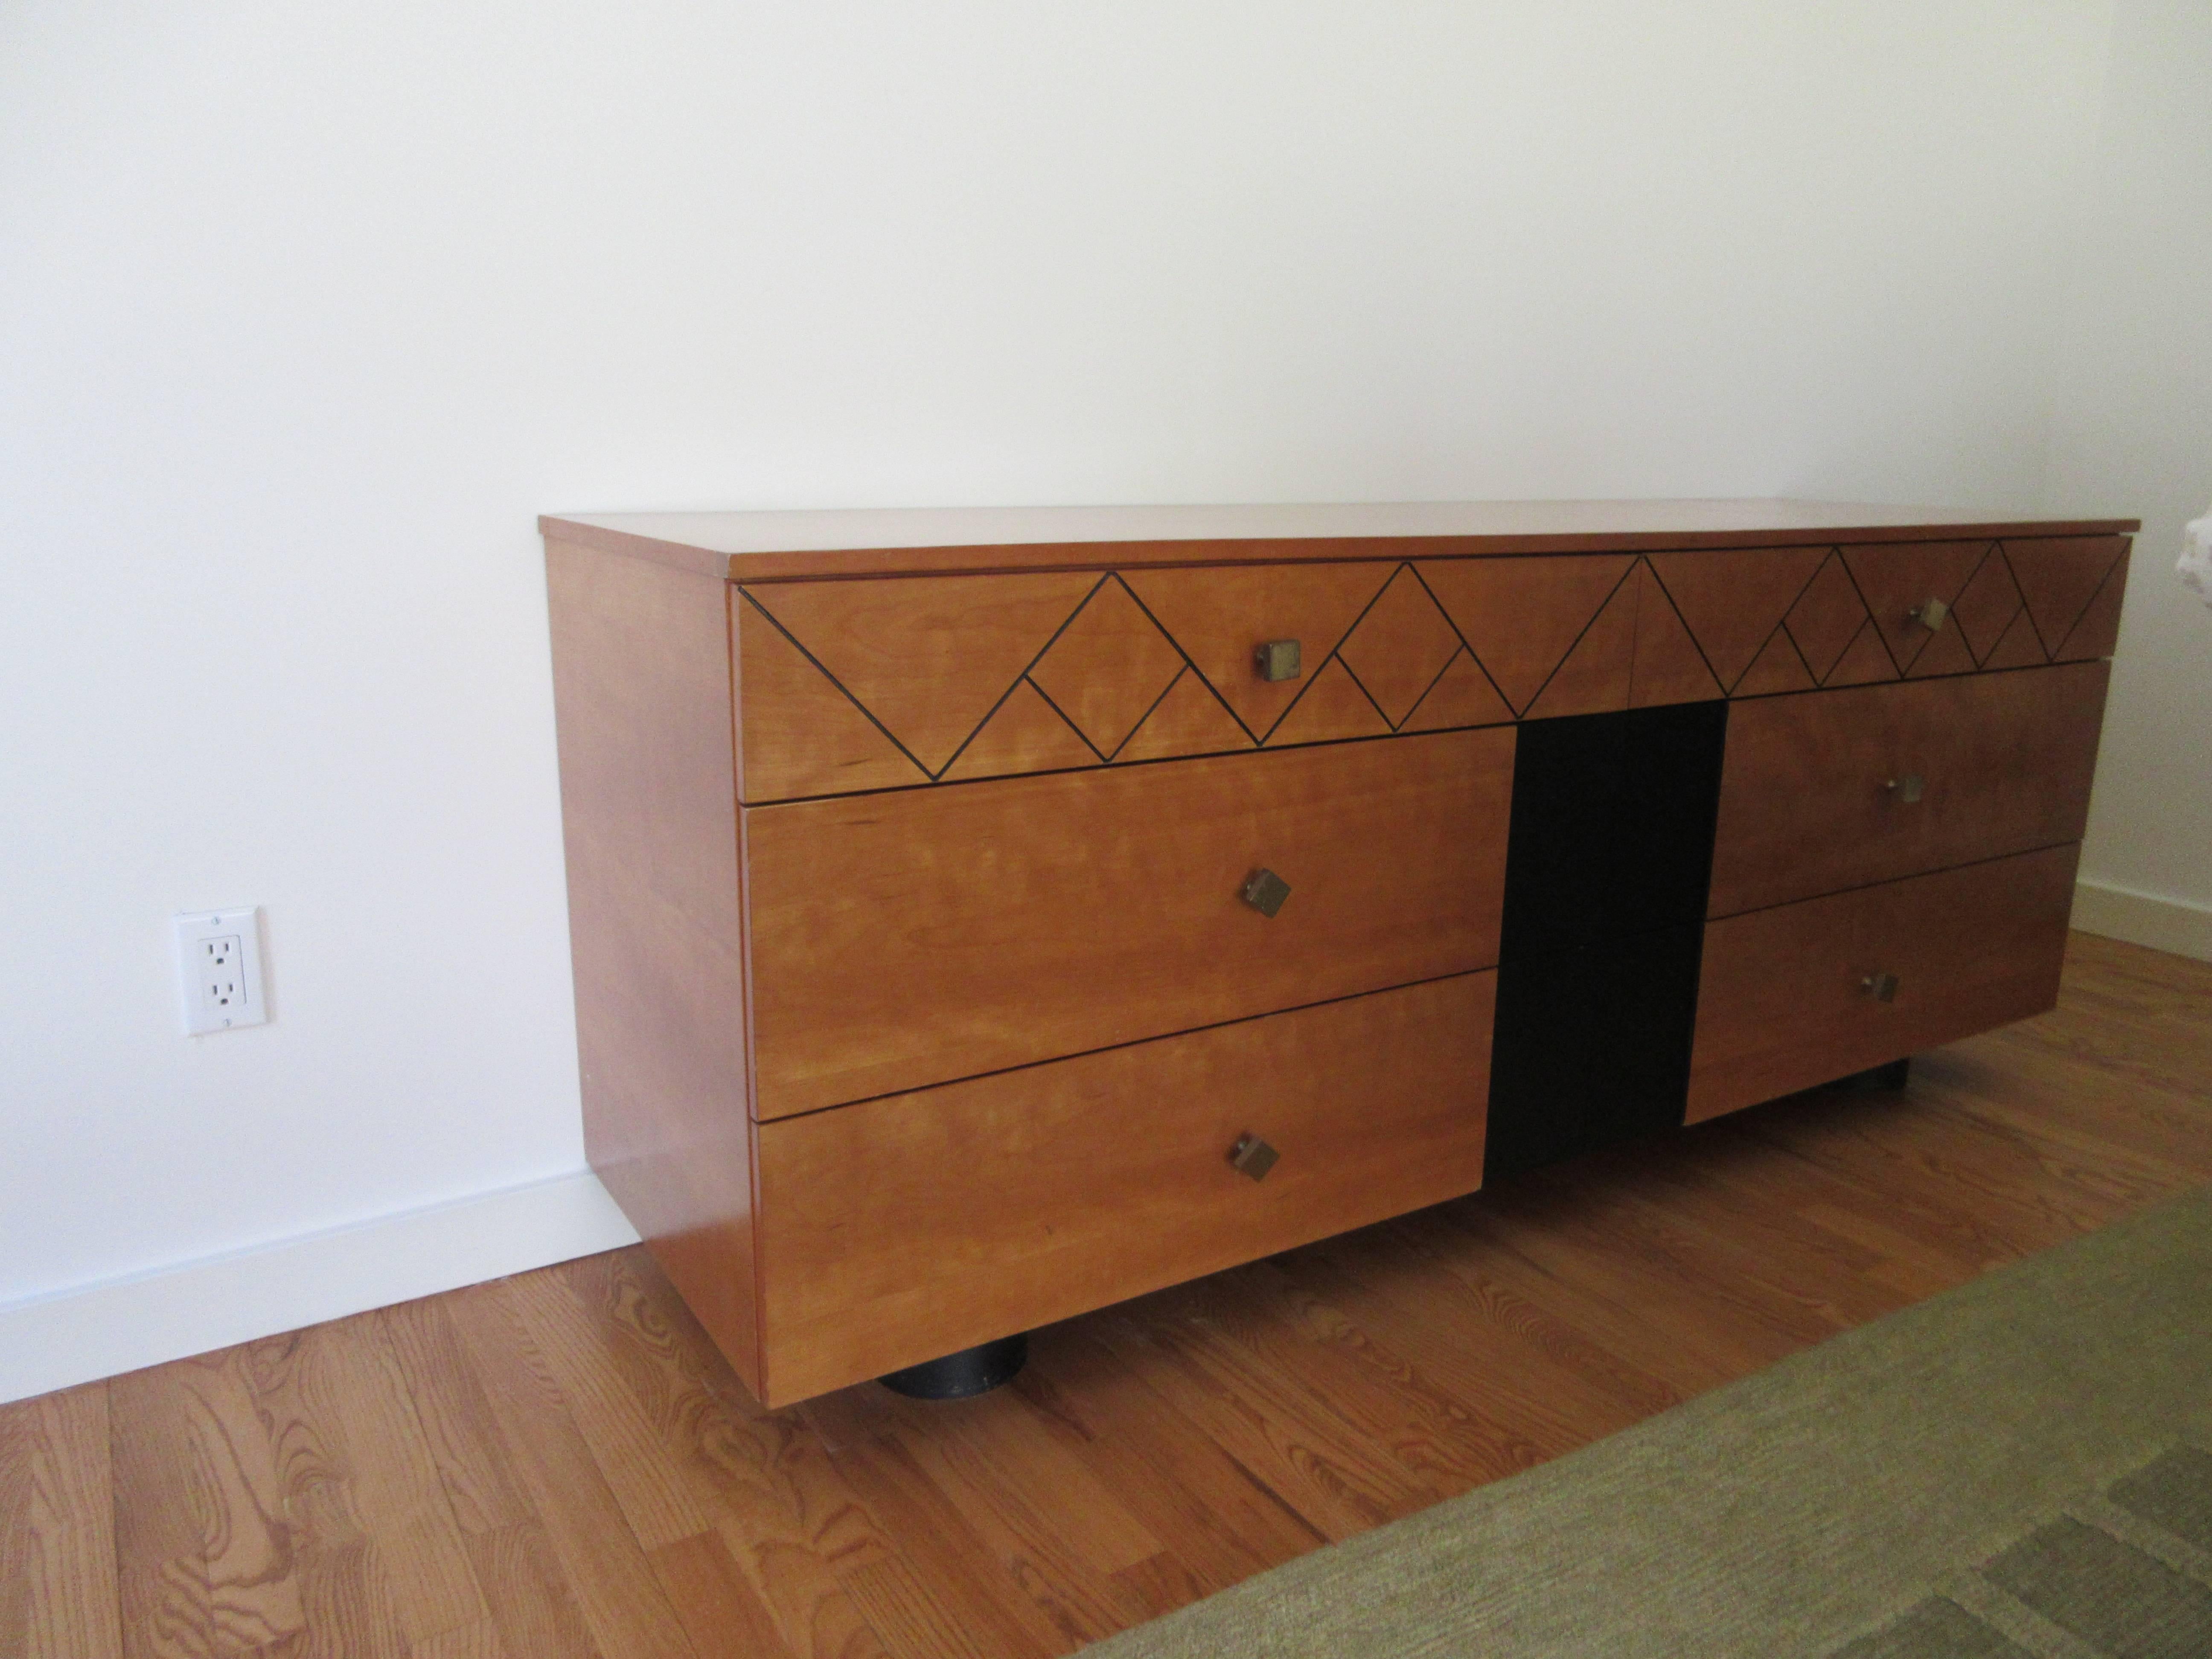 A Mid-Century Danish six-drawer dresser with six pull-out drawers. Brass diamond shape pulls. Ebony inlay diamond shapes on top drawers, with ebony ovate feet/base. Handsome burl woods with black middle panel, sharp custom piece.